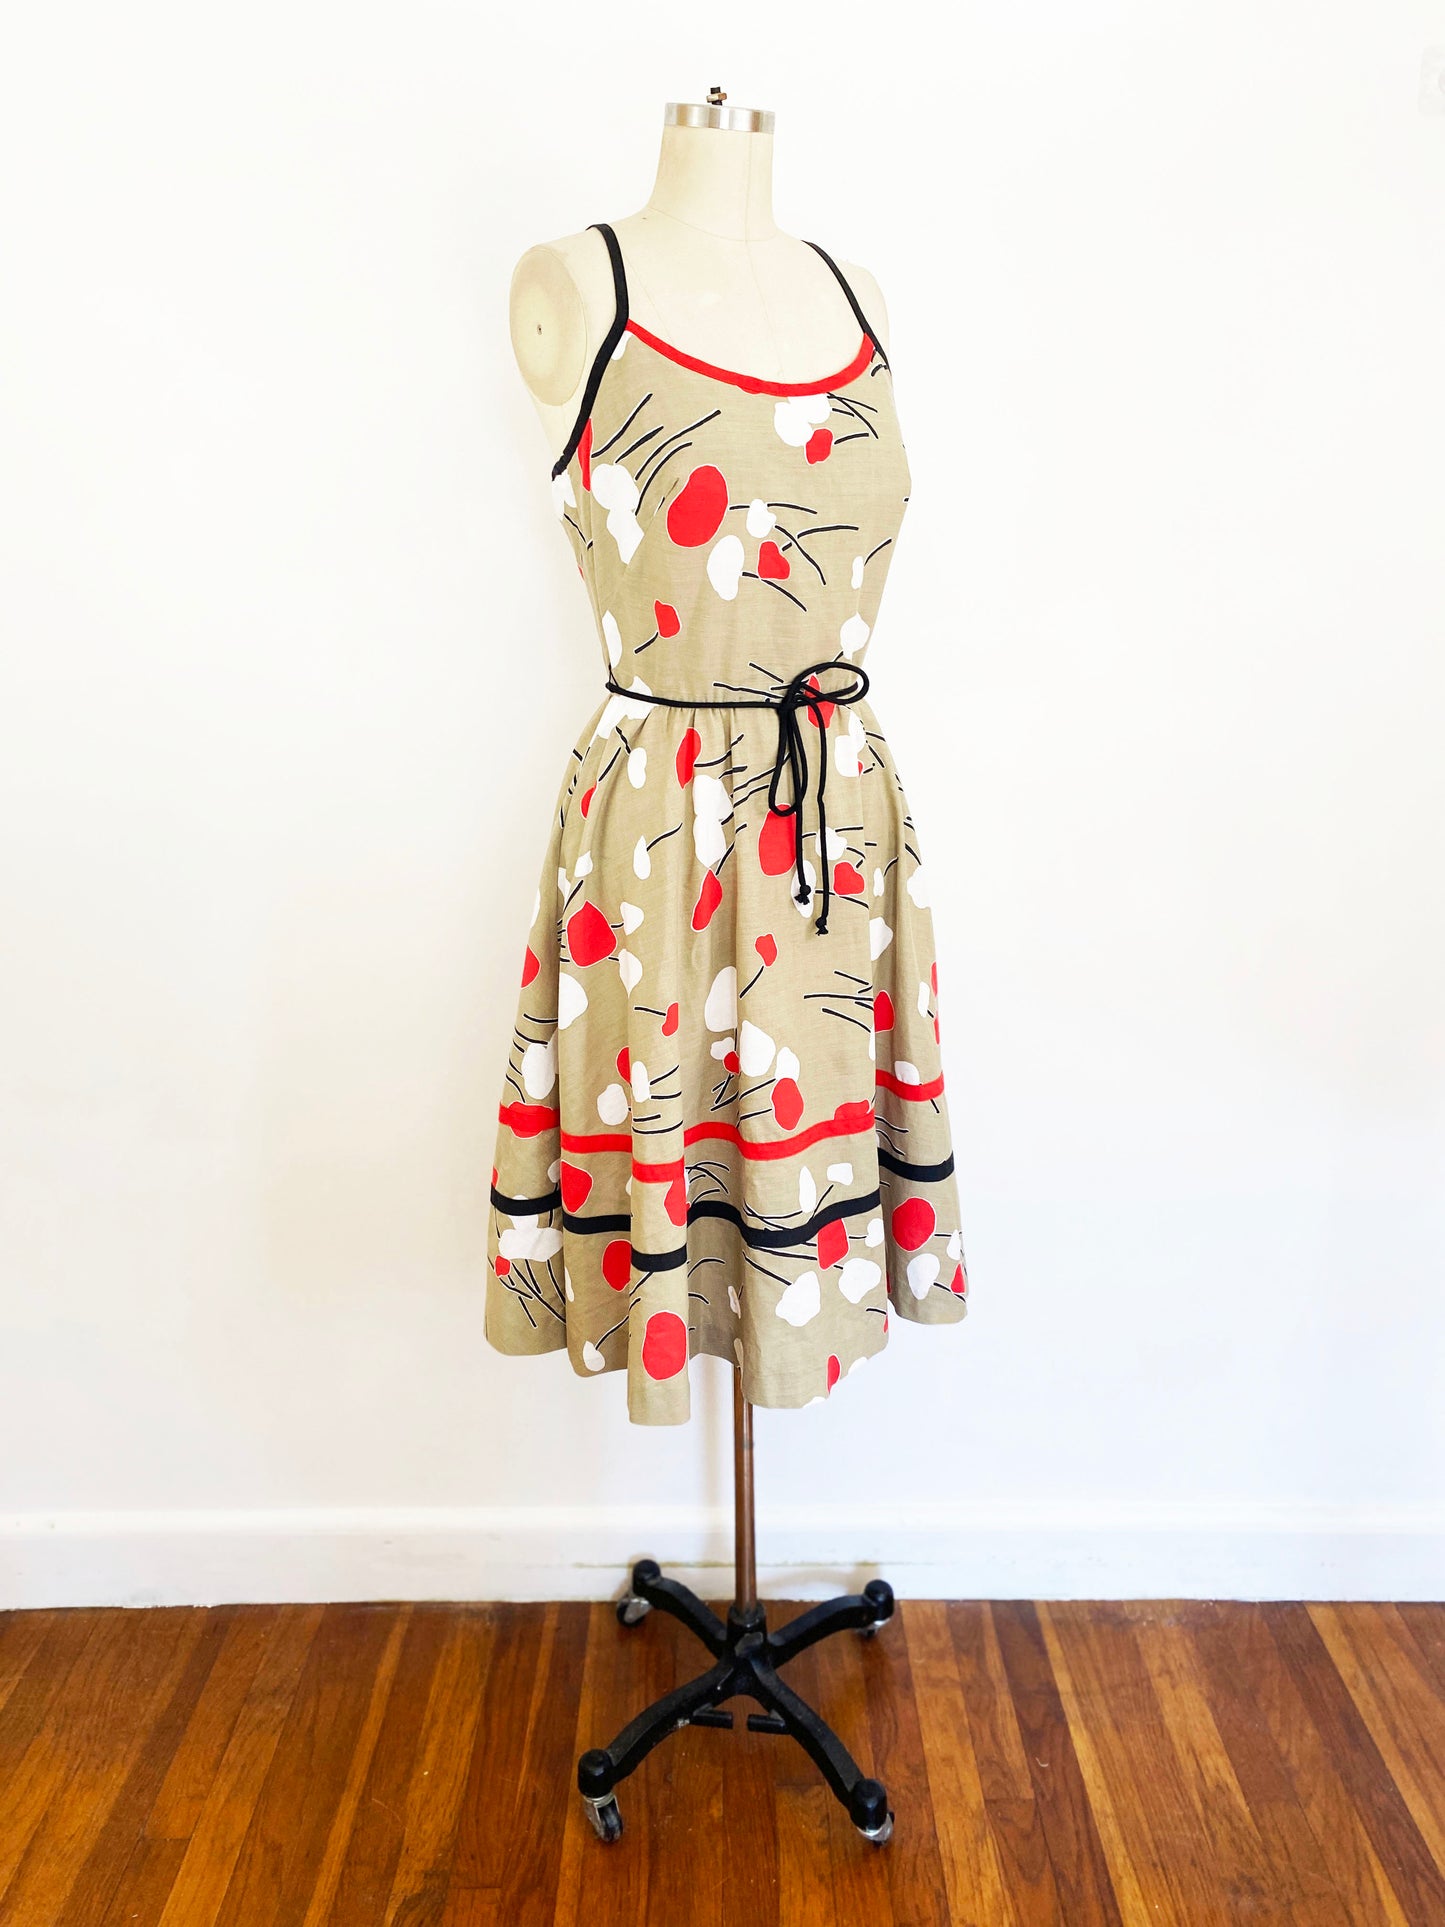 1970s Jenni Cotton Floral Dress Tan Red Fit and Flare A-line Garden Party Cute Sundress / Medium 8